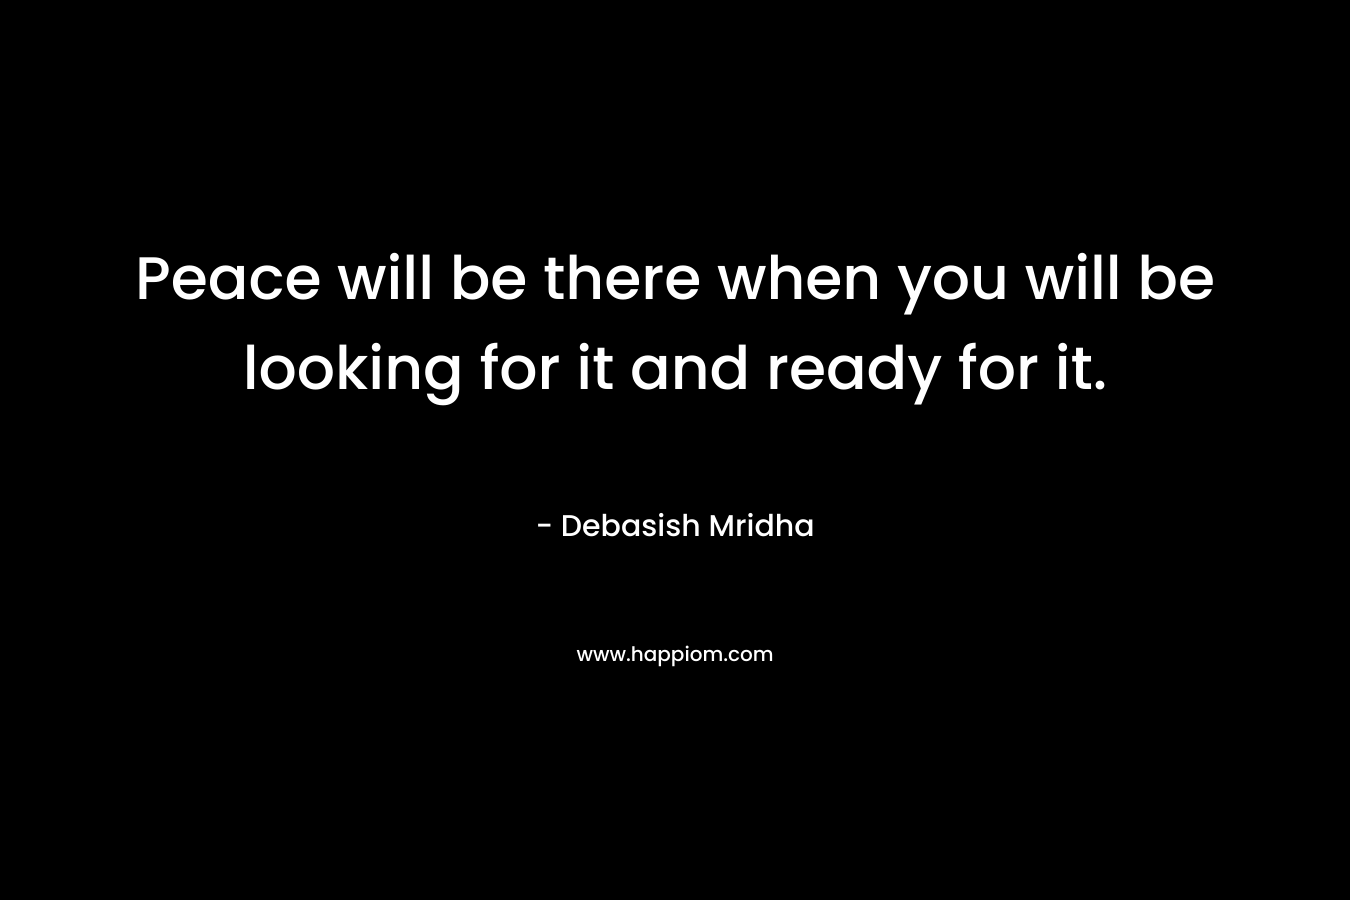 Peace will be there when you will be looking for it and ready for it.